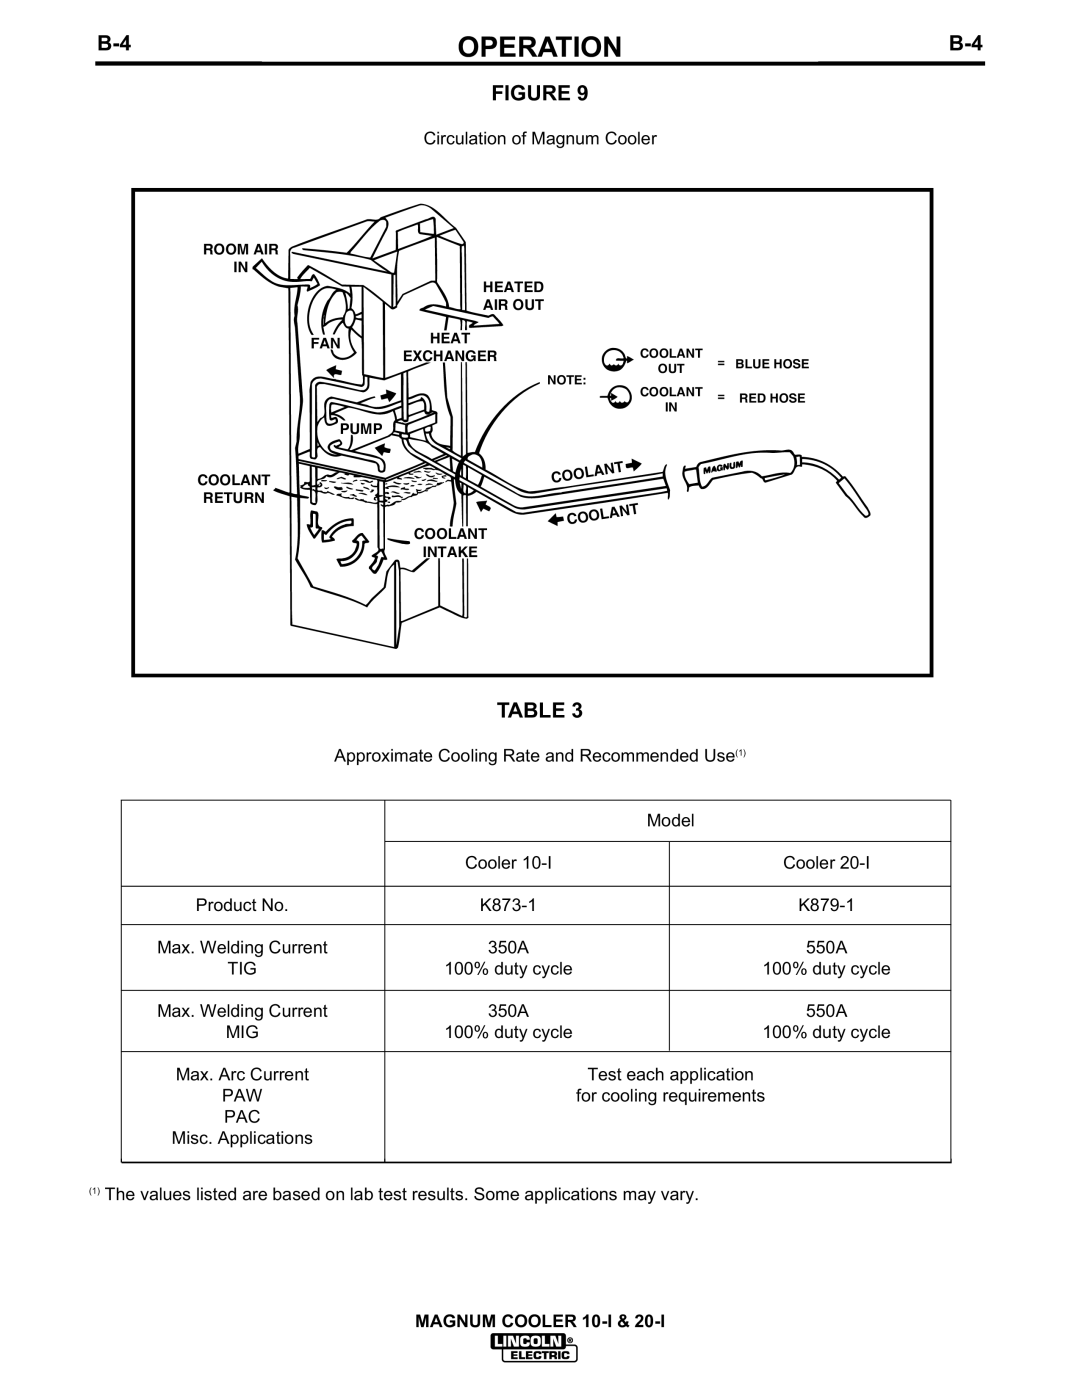 Lincoln Electric IM438-B manual Operation, Magnum Cooler 